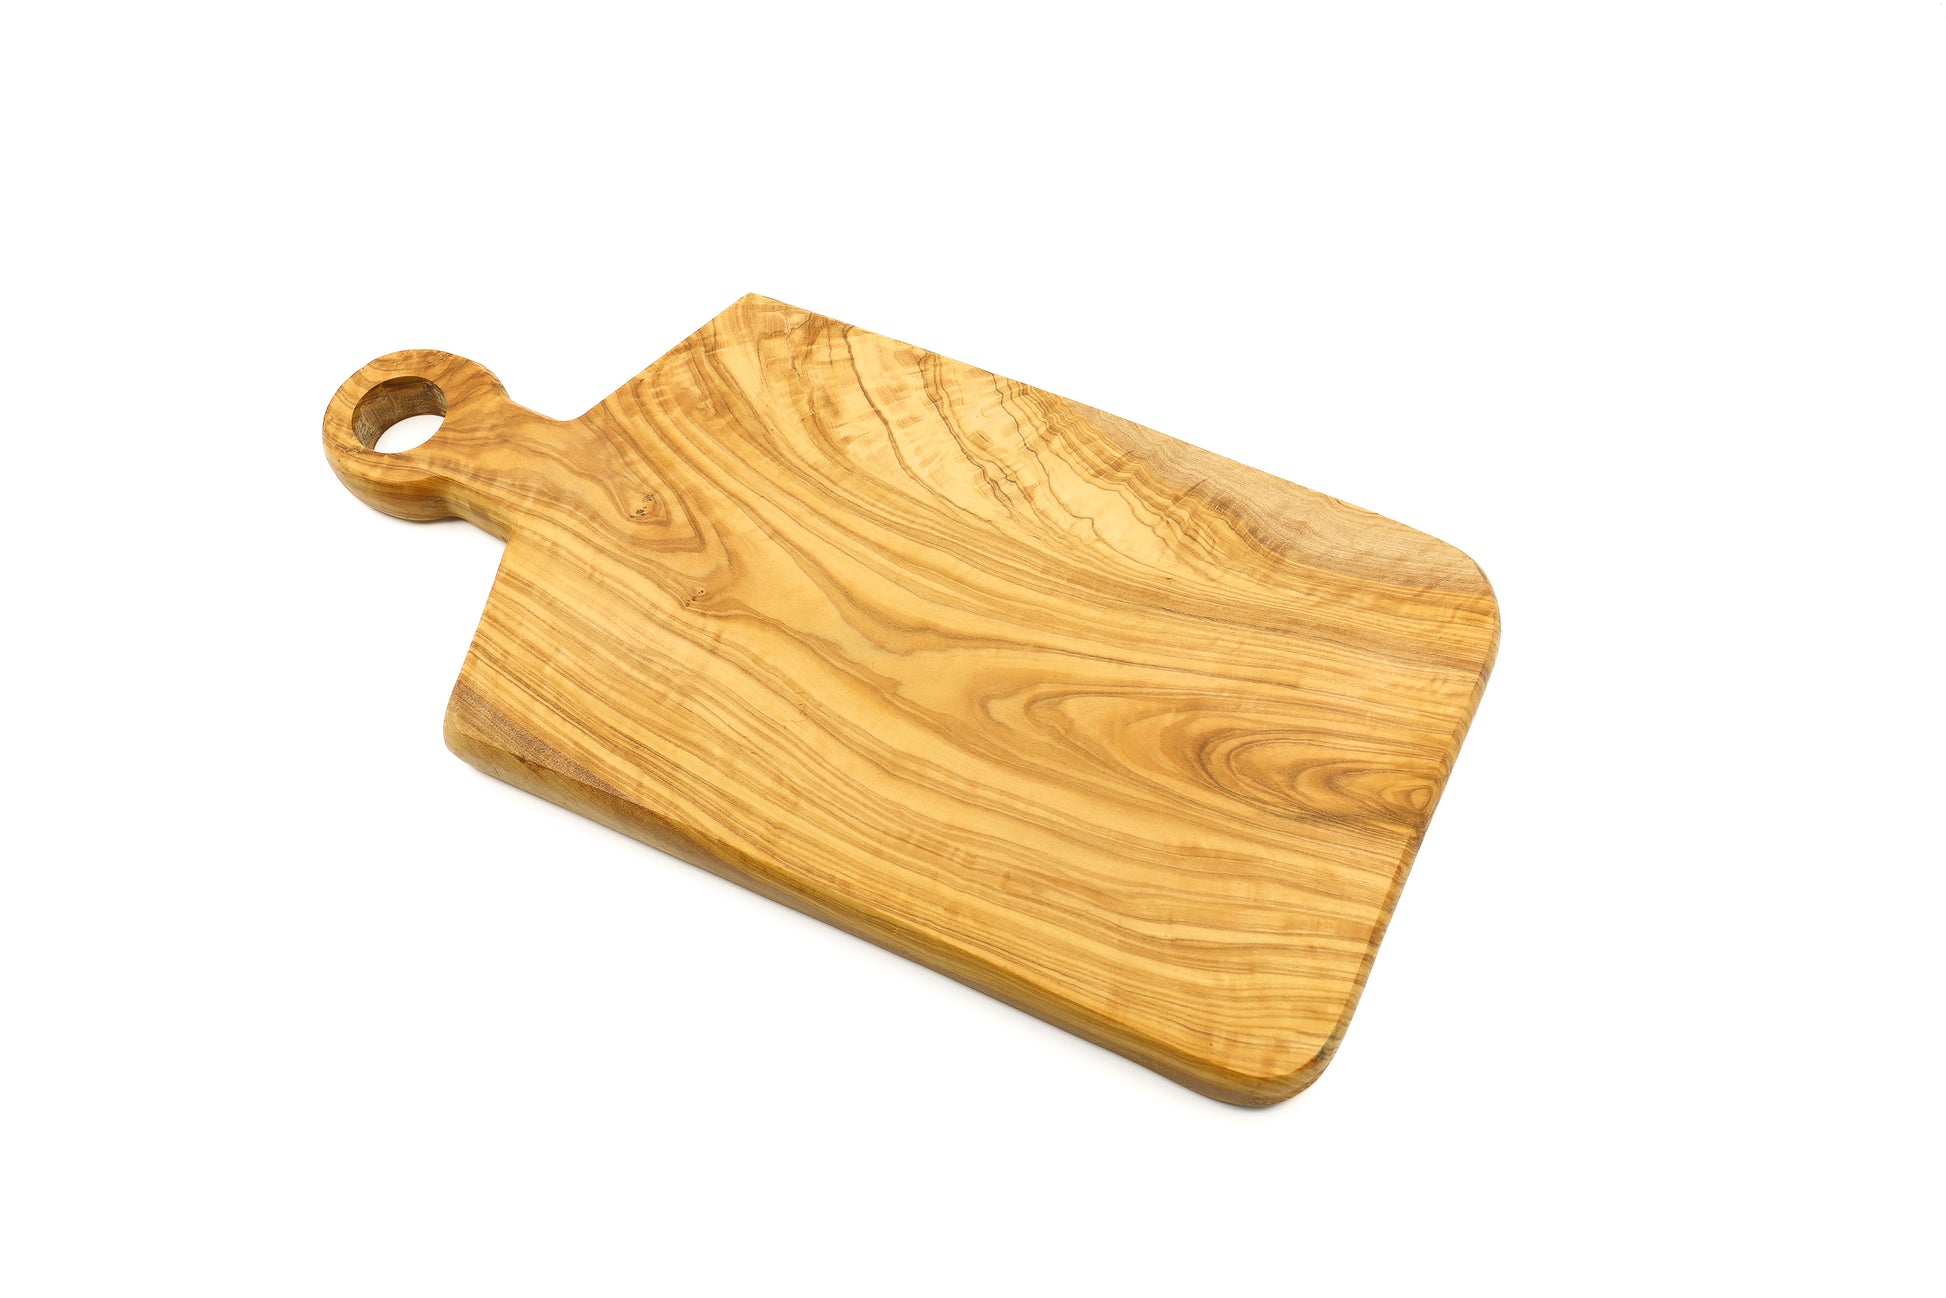 Rectangular cutting board in olive wood with ringed handle